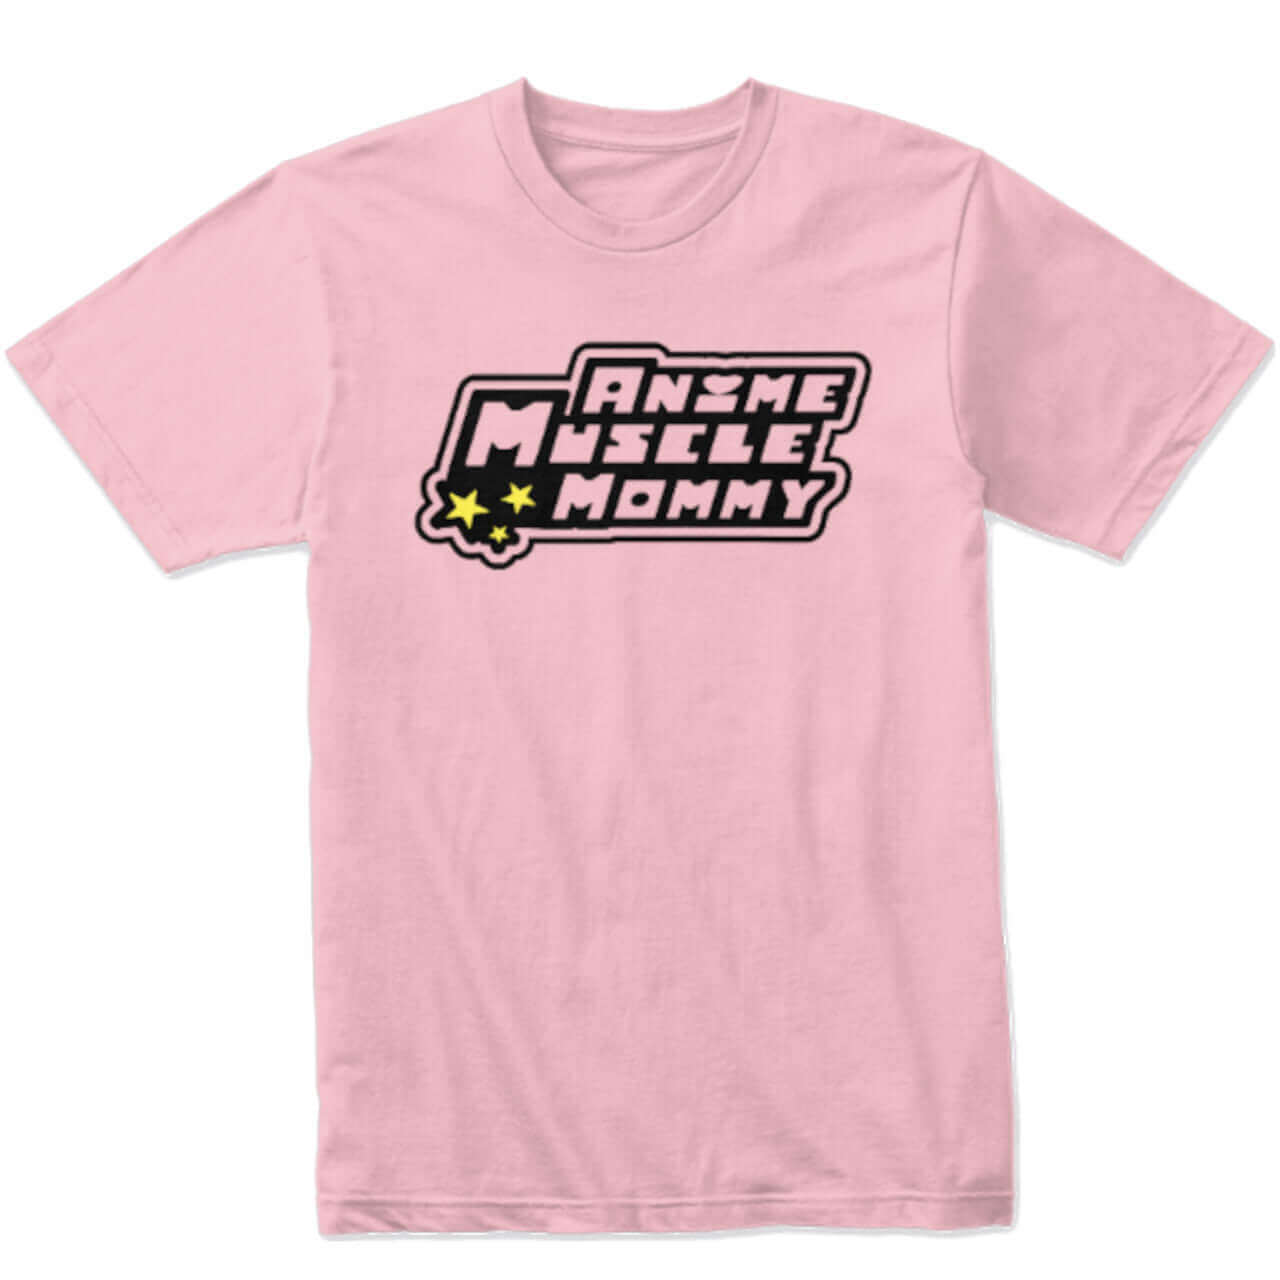 Anime Muscle Mommy - Power Puff Girls Inspired Shirt